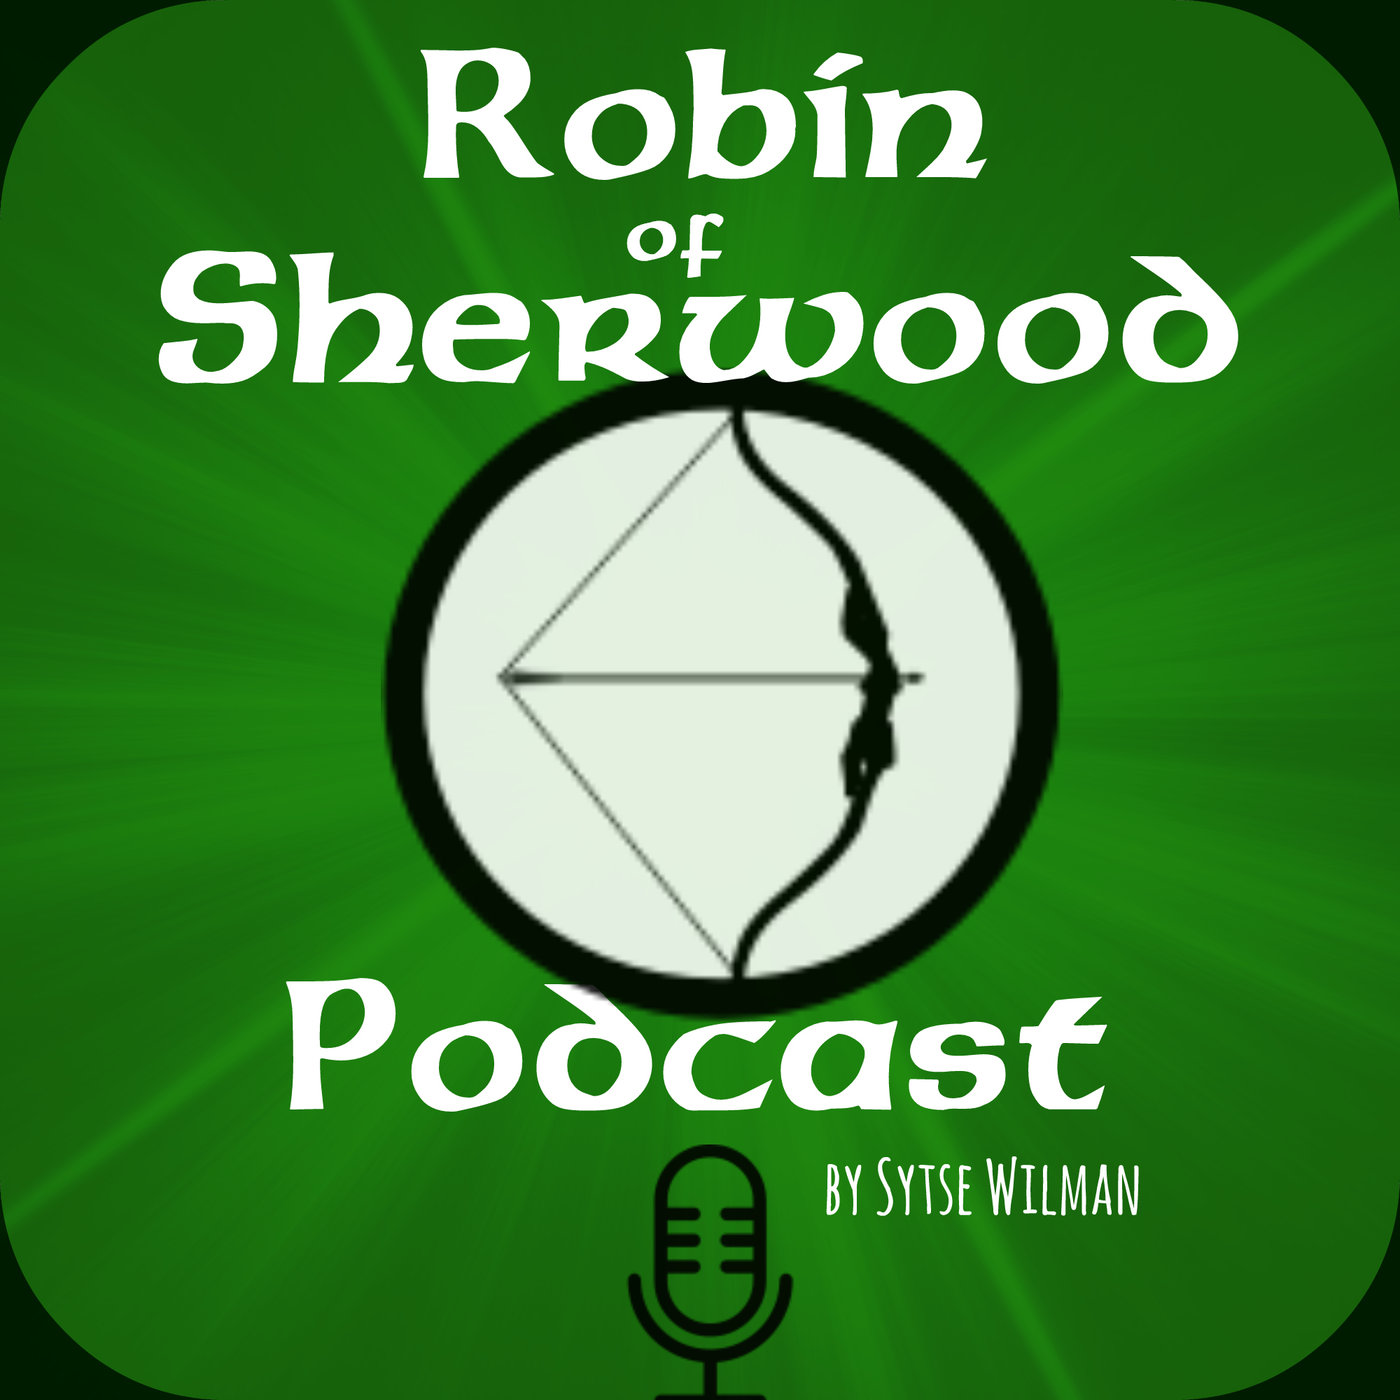 Robin of Sherwood Podcast s02 e03 The Prophecy